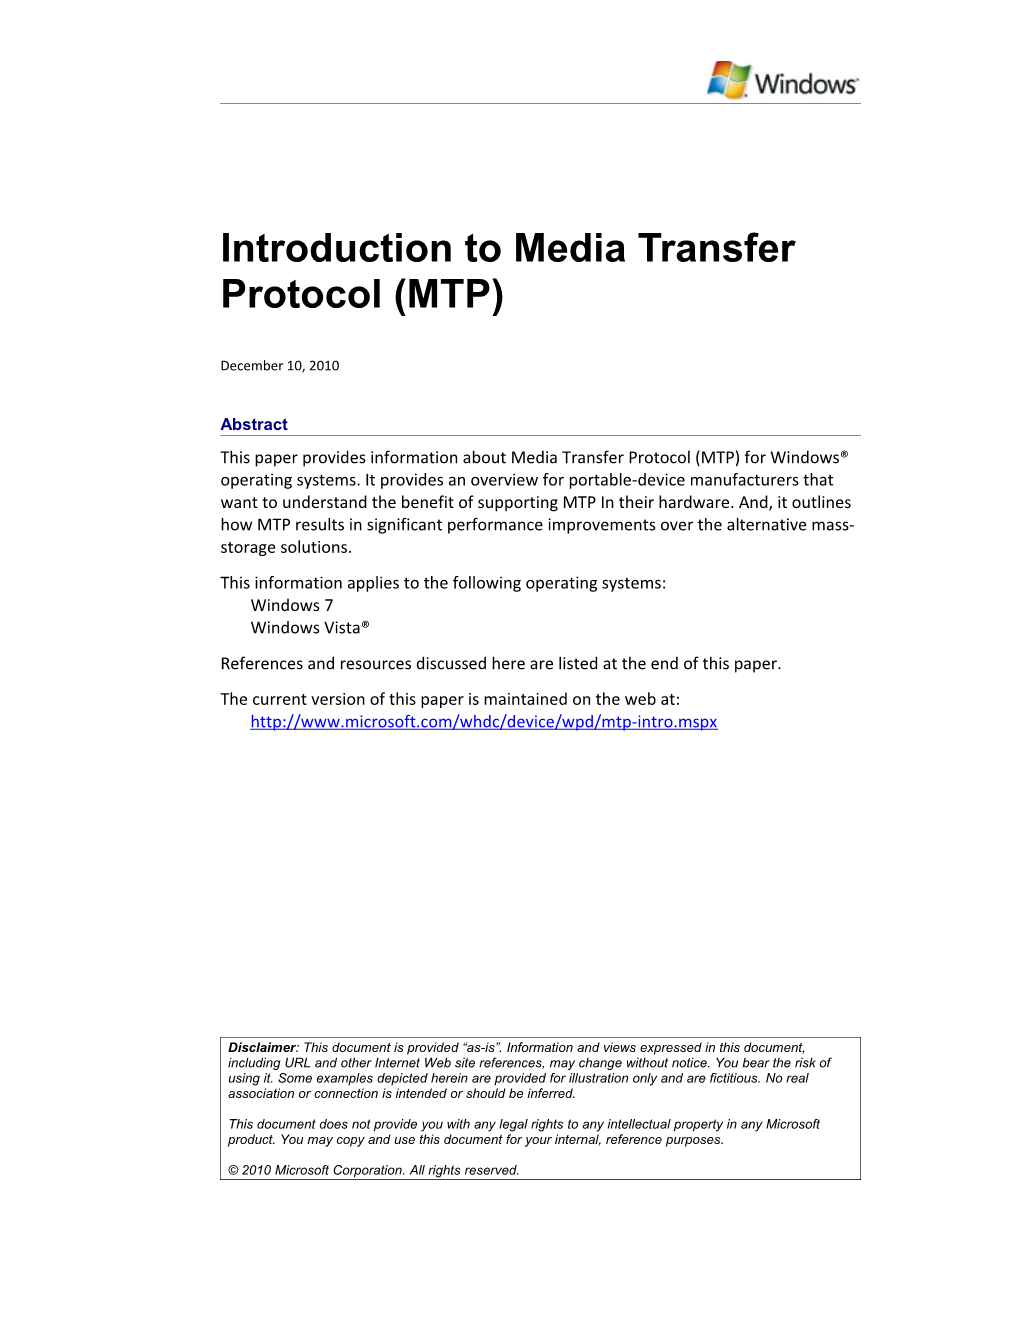 Introduction to Media Transfer Protocol (MTP) - 2